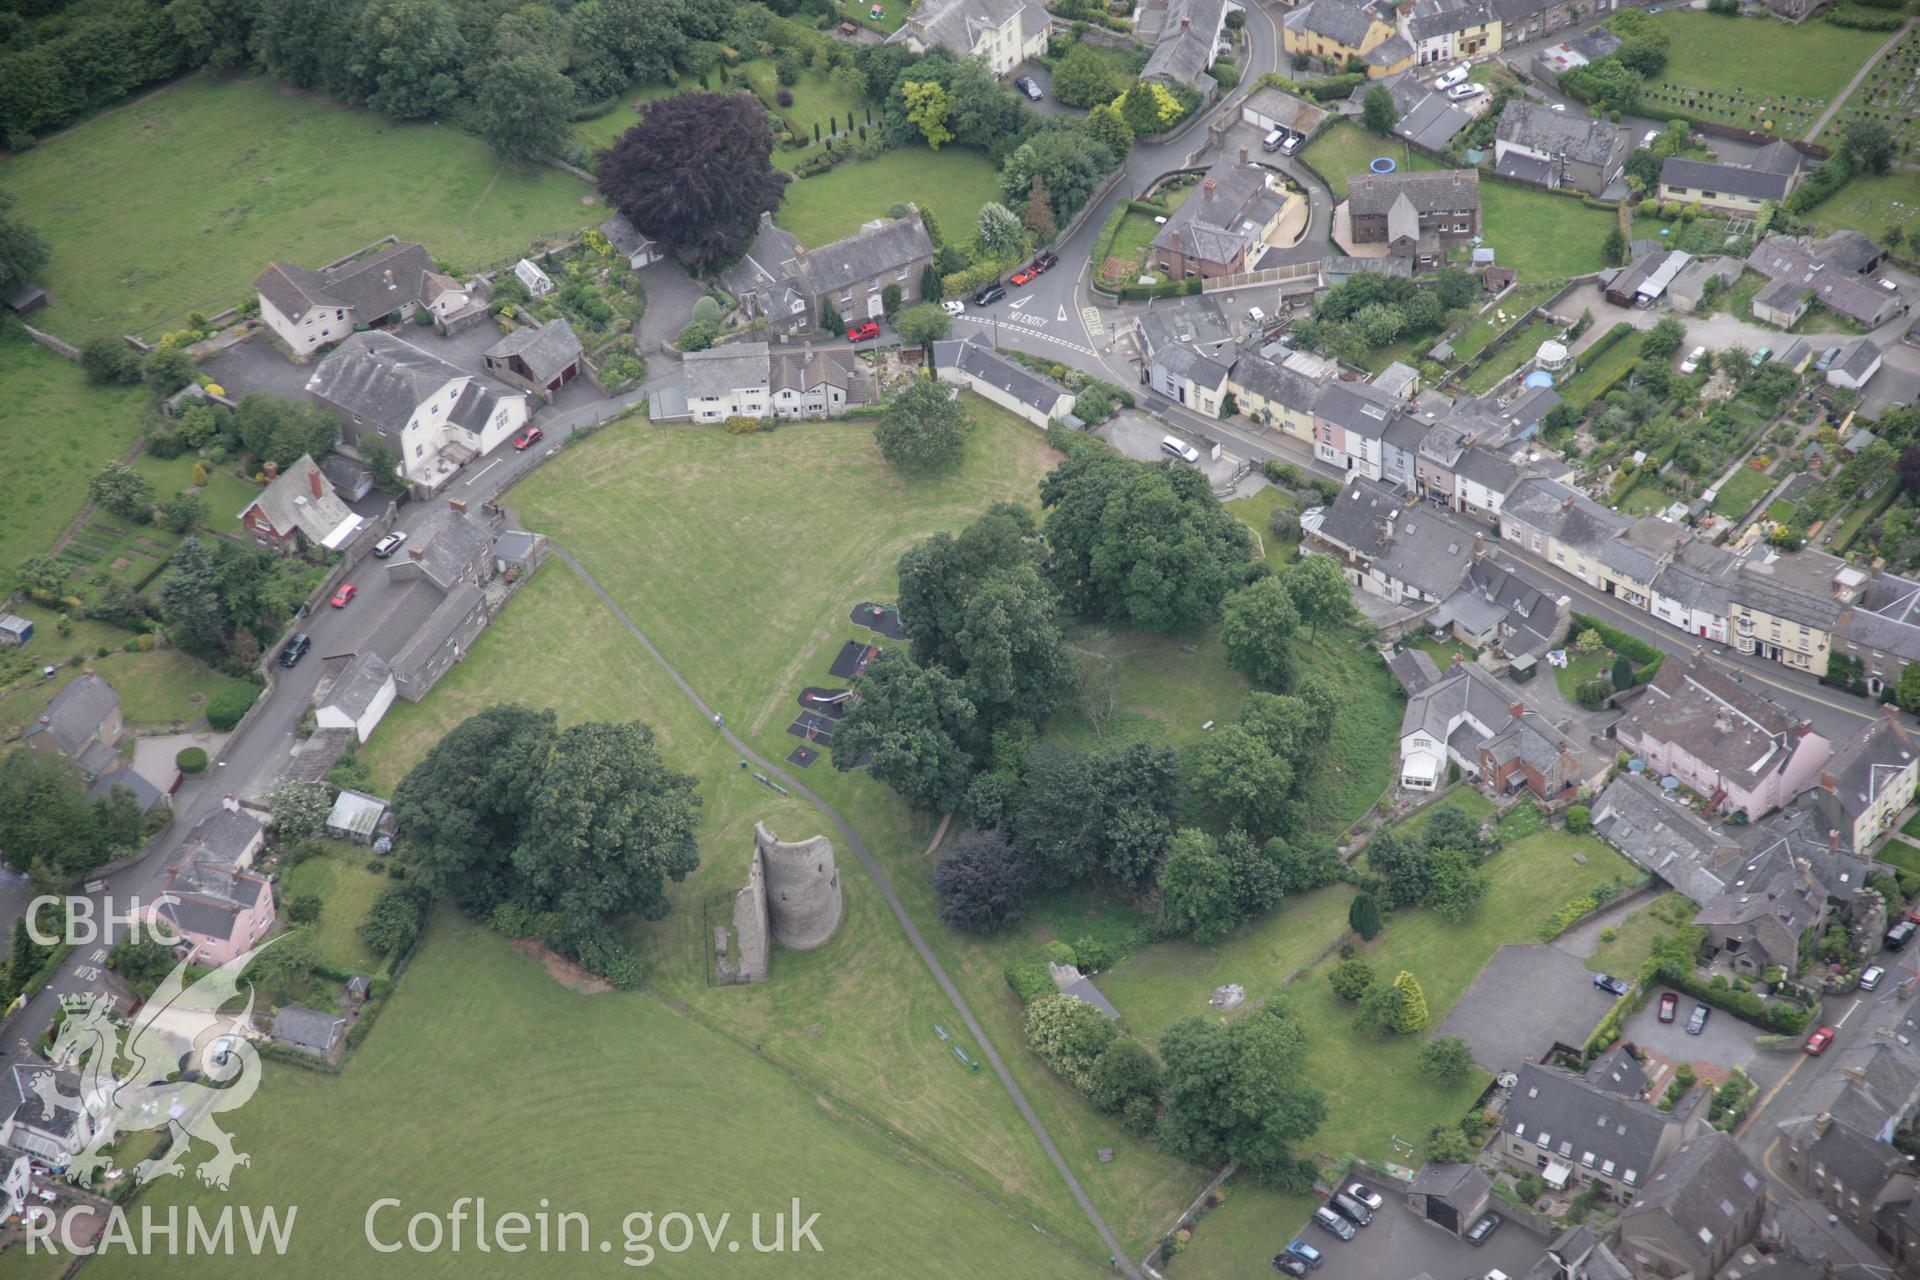 RCAHMW digital colour oblique photograph of Crickhowell Castle viewed from the north-east. Taken on 07/07/2005 by T.G. Driver.